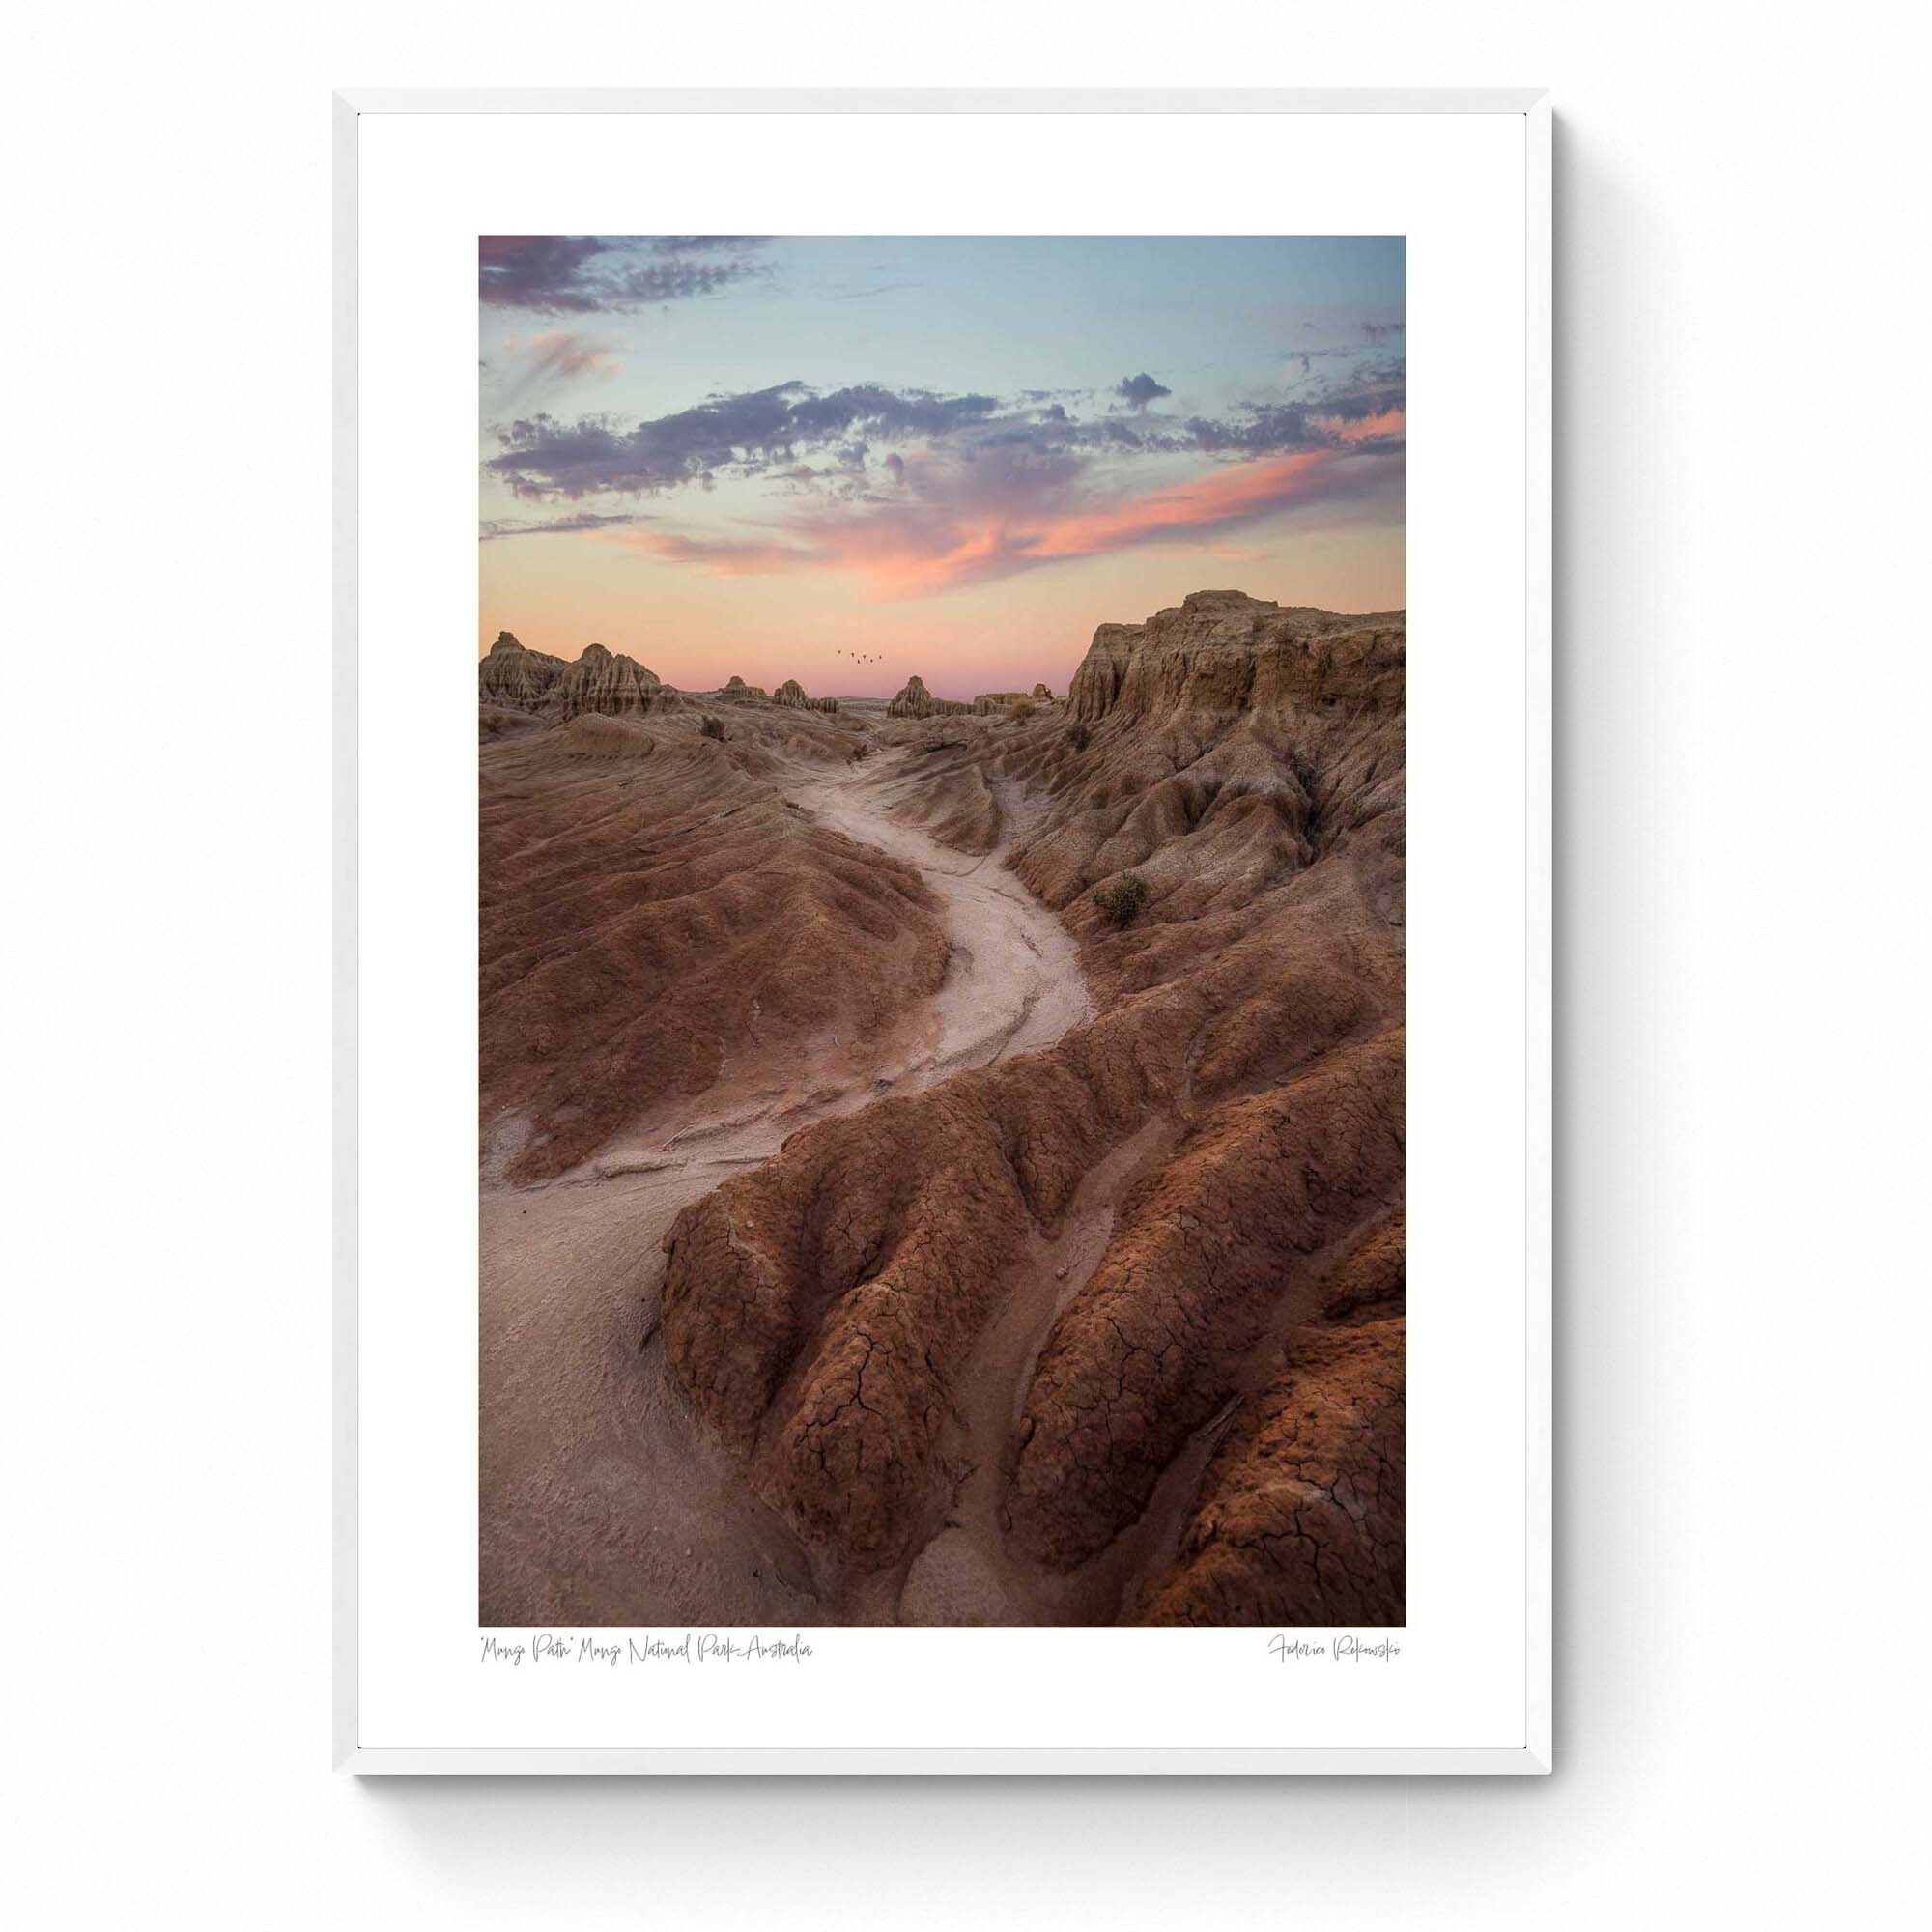 A dusty path through the eroded formations of Mungo National Park, under a sunset sky with streaks of pink and blue. Framed